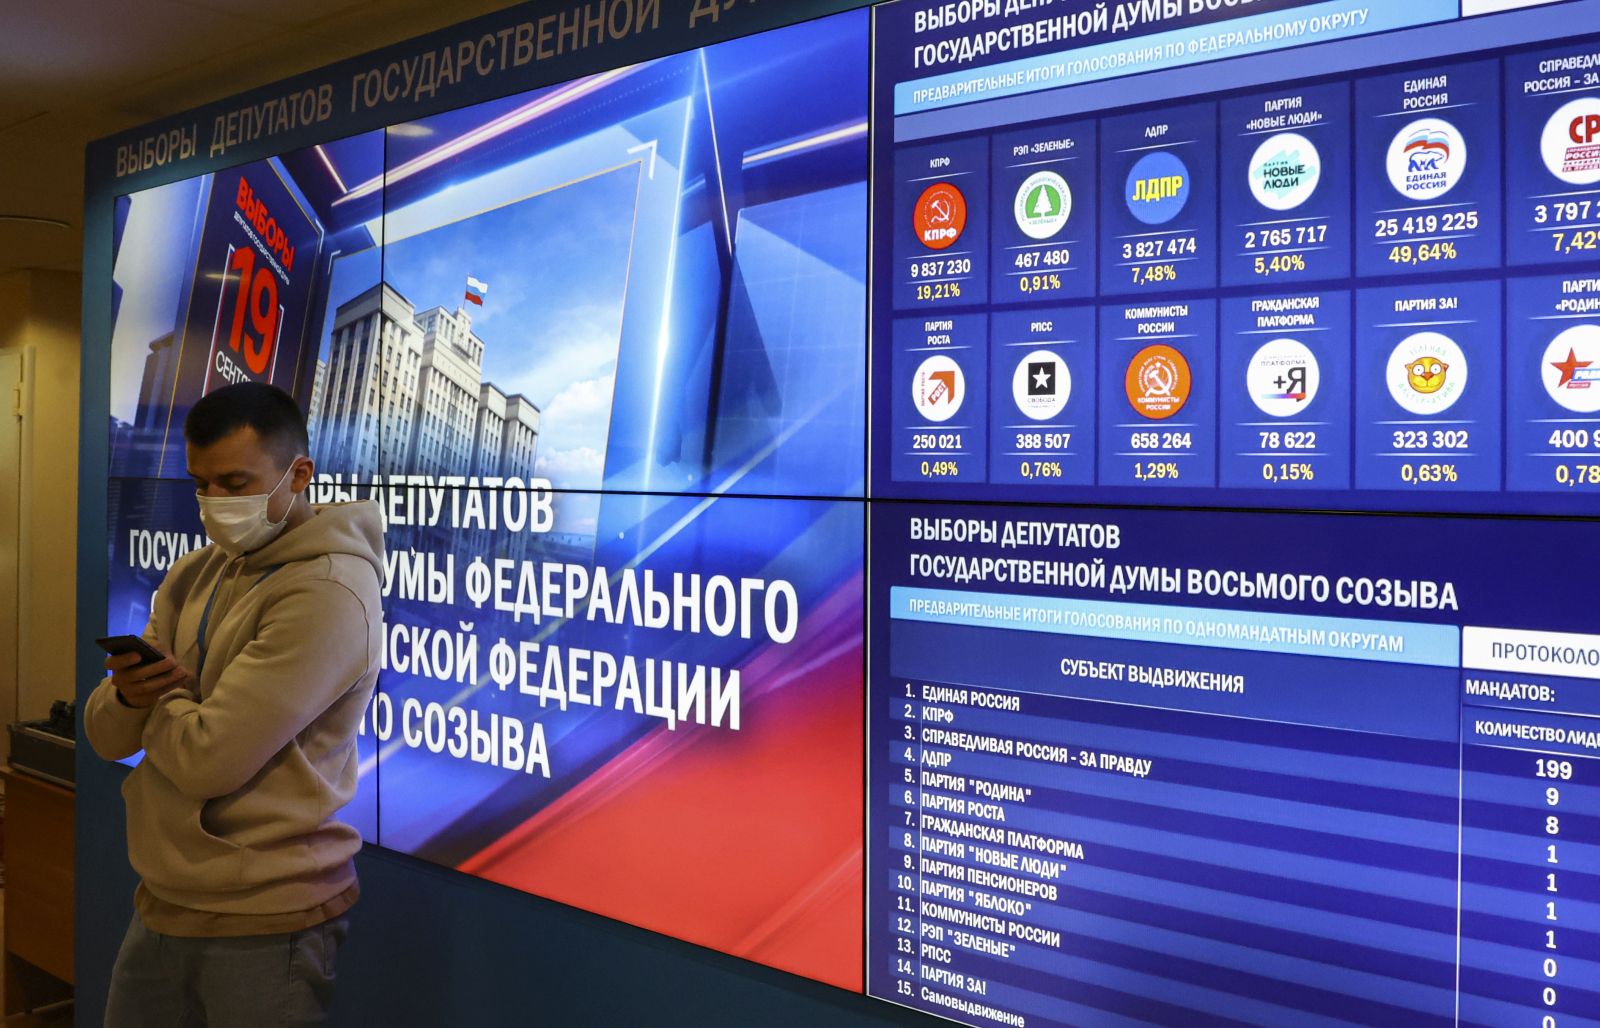 epa09477708 A man stands in front of screens displaying preliminary voting results in the Russian Central Election Commission following the Russian Parliamentary elections in Moscow, Russia, 20 September 2021. According to the preliminary information 195 representatives of United Russia, 15 representatives of the Communist Party, 7 representatives of A Just Russia, and 1 representative of the Liberal Democratic Party have won the State Duma (Russia's lower house of parliament) elections in single-member constituencies.  EPA/YURI KOCHETKOV